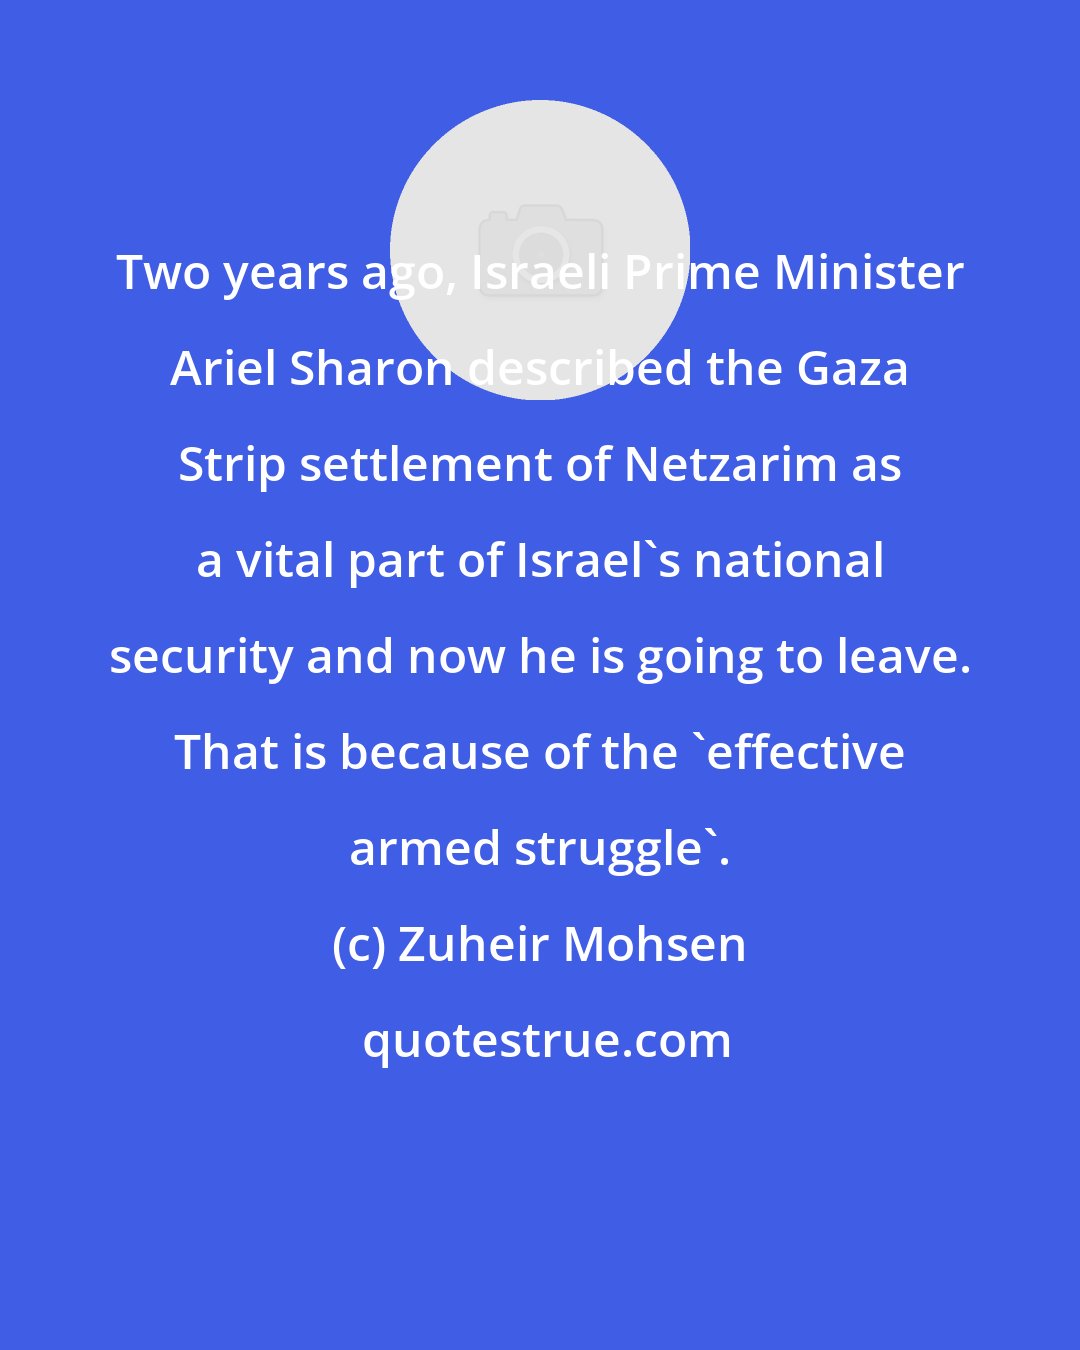 Zuheir Mohsen: Two years ago, Israeli Prime Minister Ariel Sharon described the Gaza Strip settlement of Netzarim as a vital part of Israel's national security and now he is going to leave. That is because of the 'effective armed struggle'.